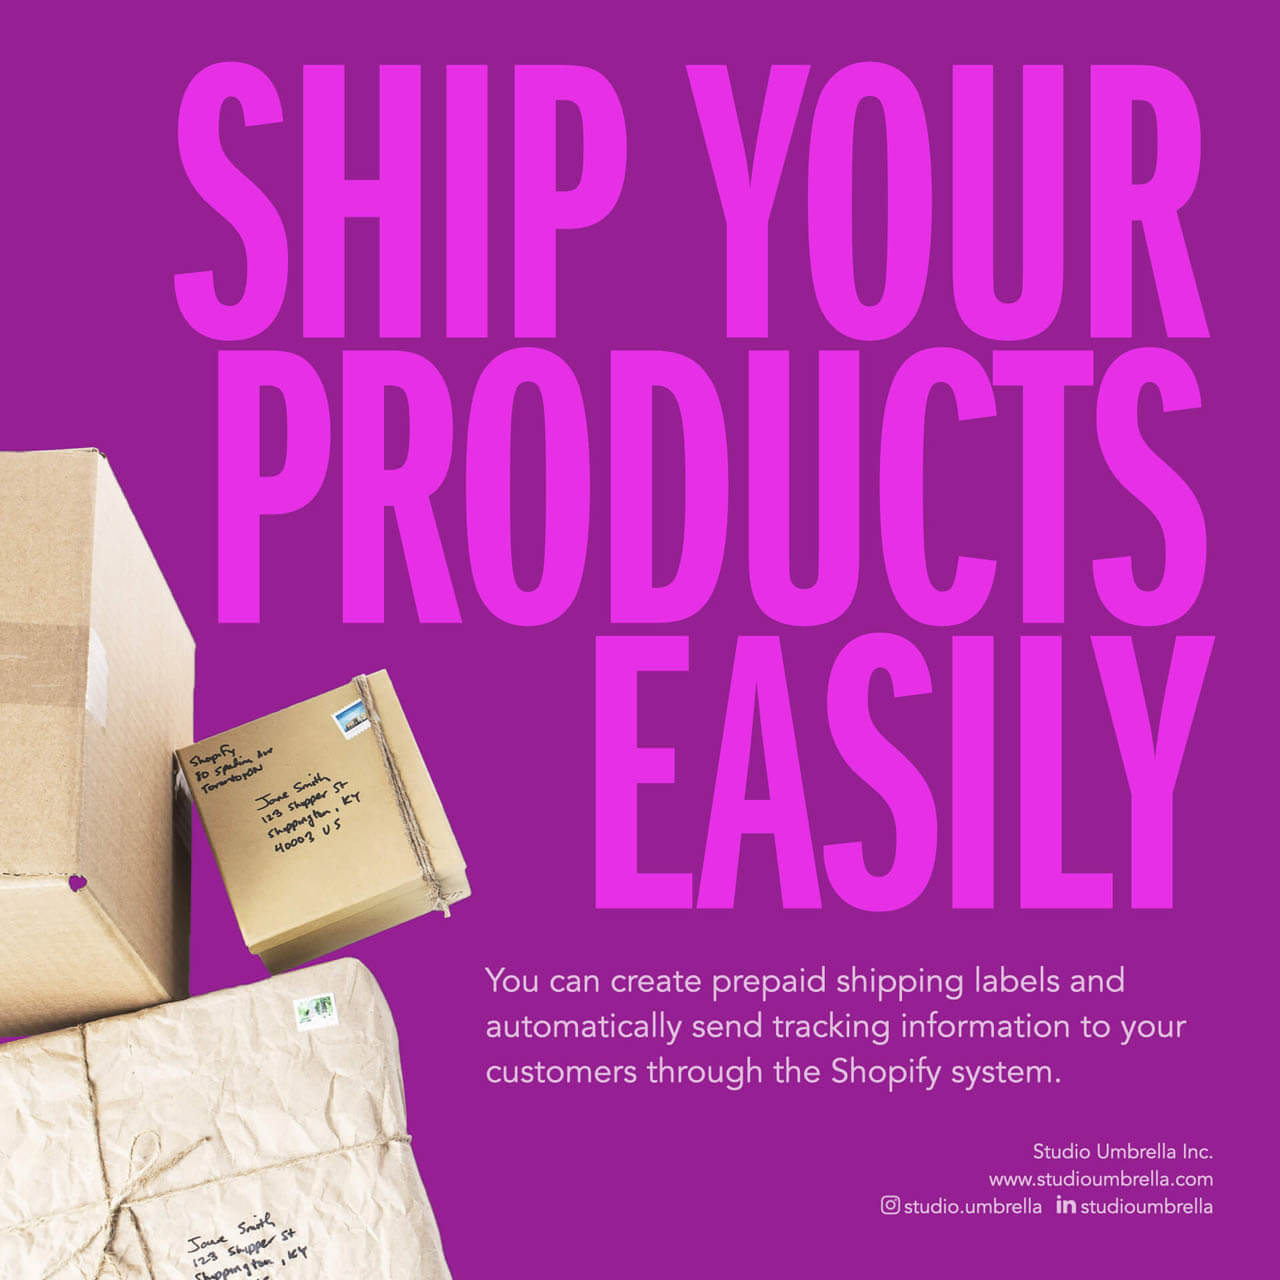 Ship your products easily